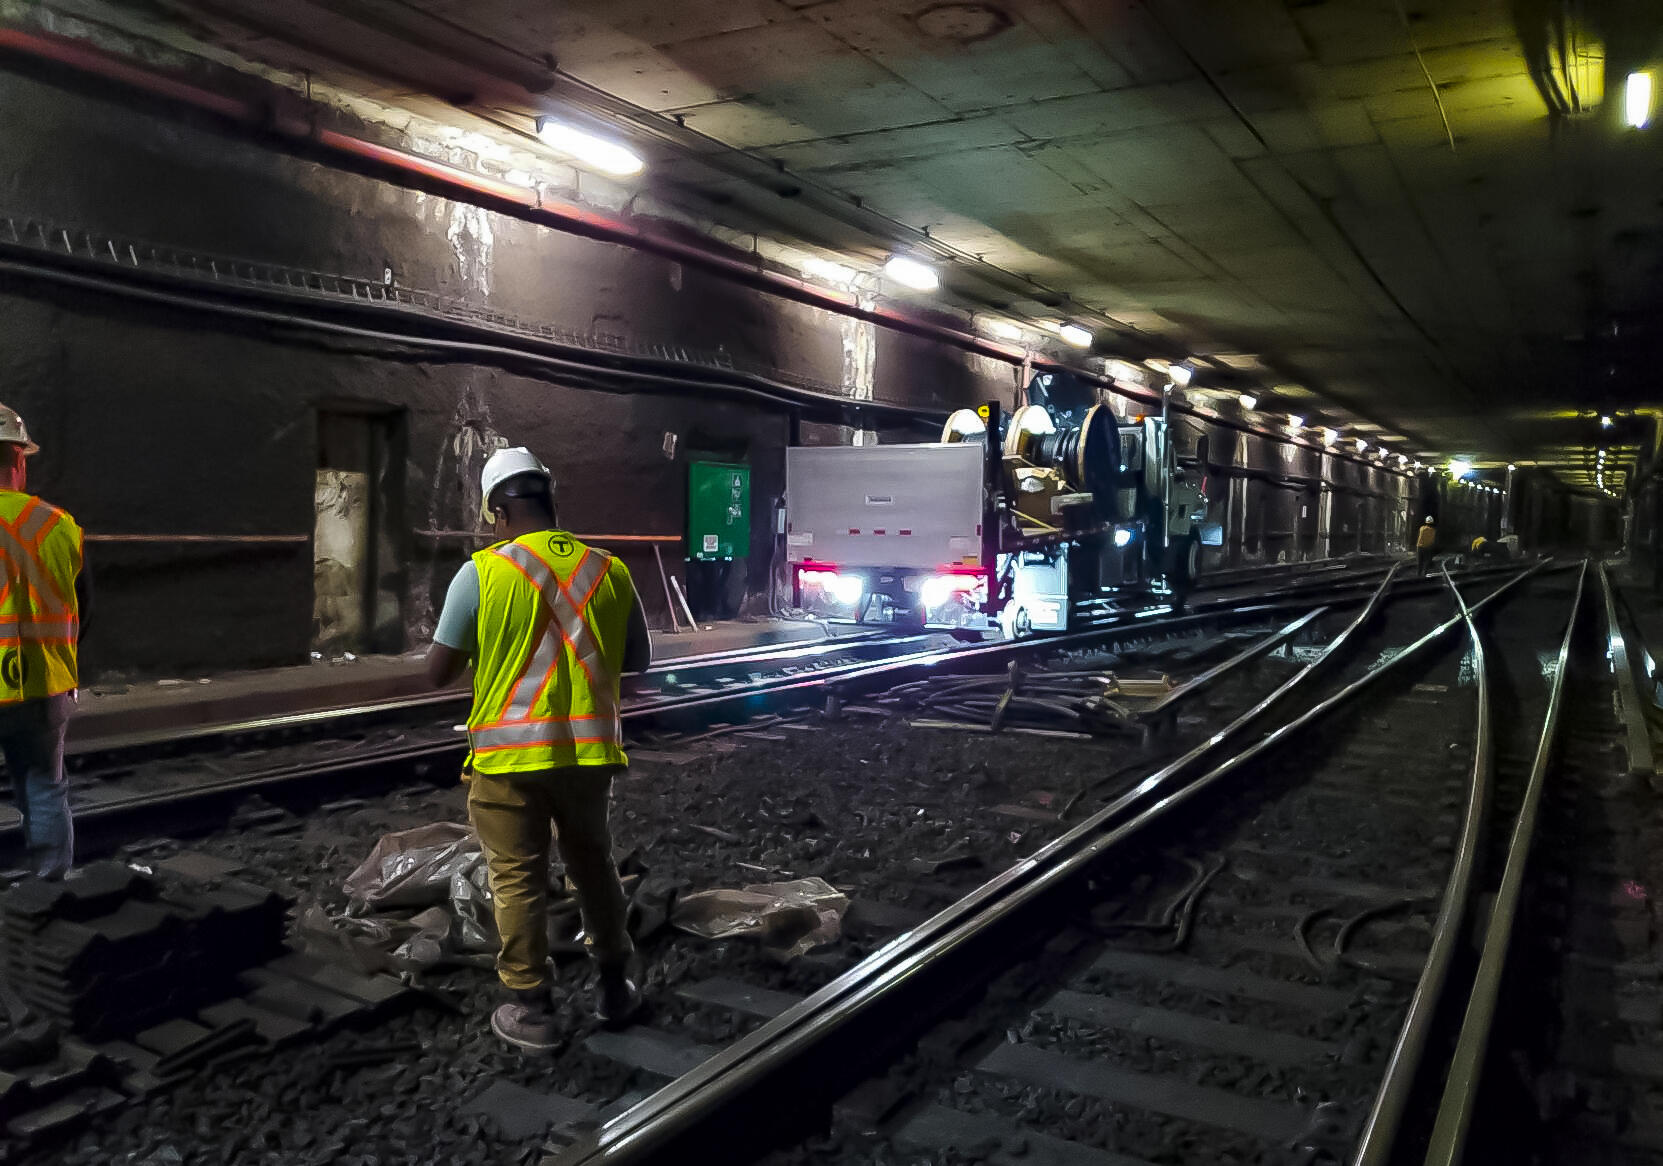 The MBTA is reconstructing the track crossing between Alewife and Davis stations on the Red Line to allow for an increase in operating speeds.